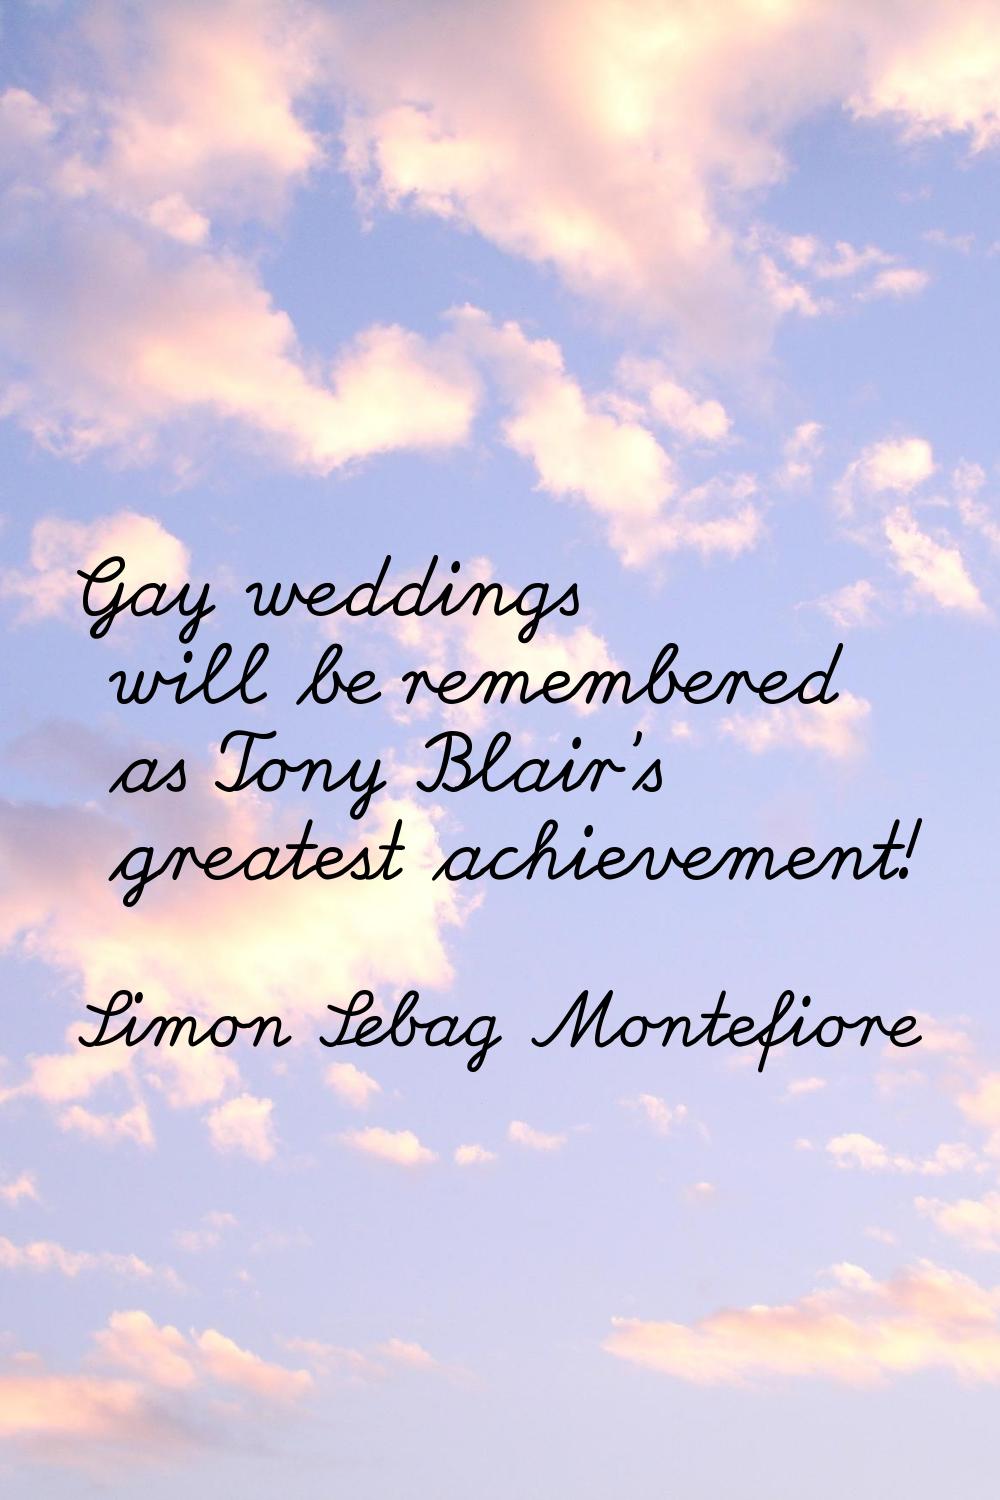 Gay weddings will be remembered as Tony Blair's greatest achievement!